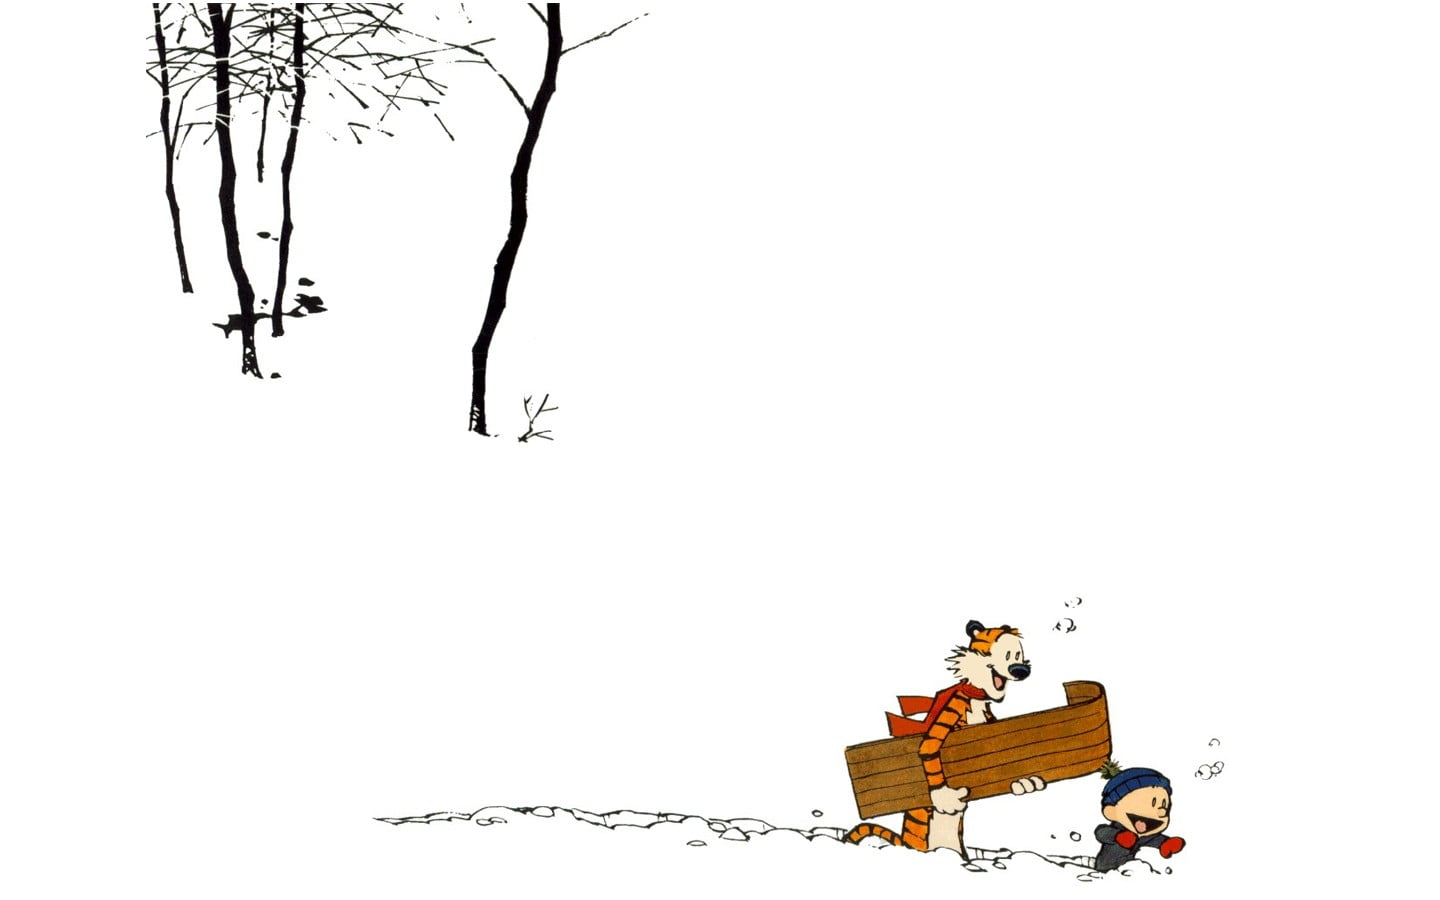 child and tiger near trees artwork, Calvin and Hobbes, copy space